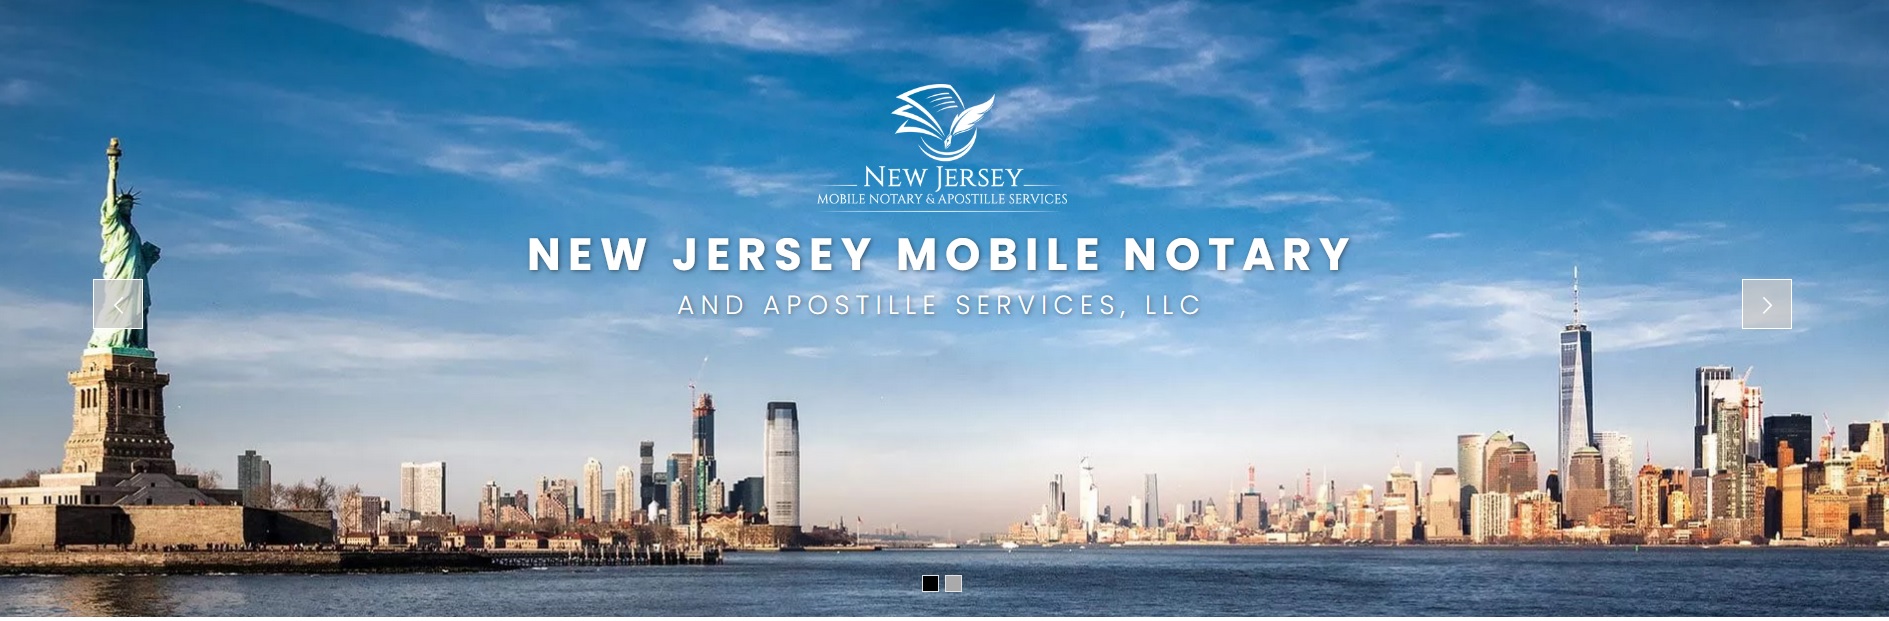 New Jersey Mobile Notary  & Apostille Services